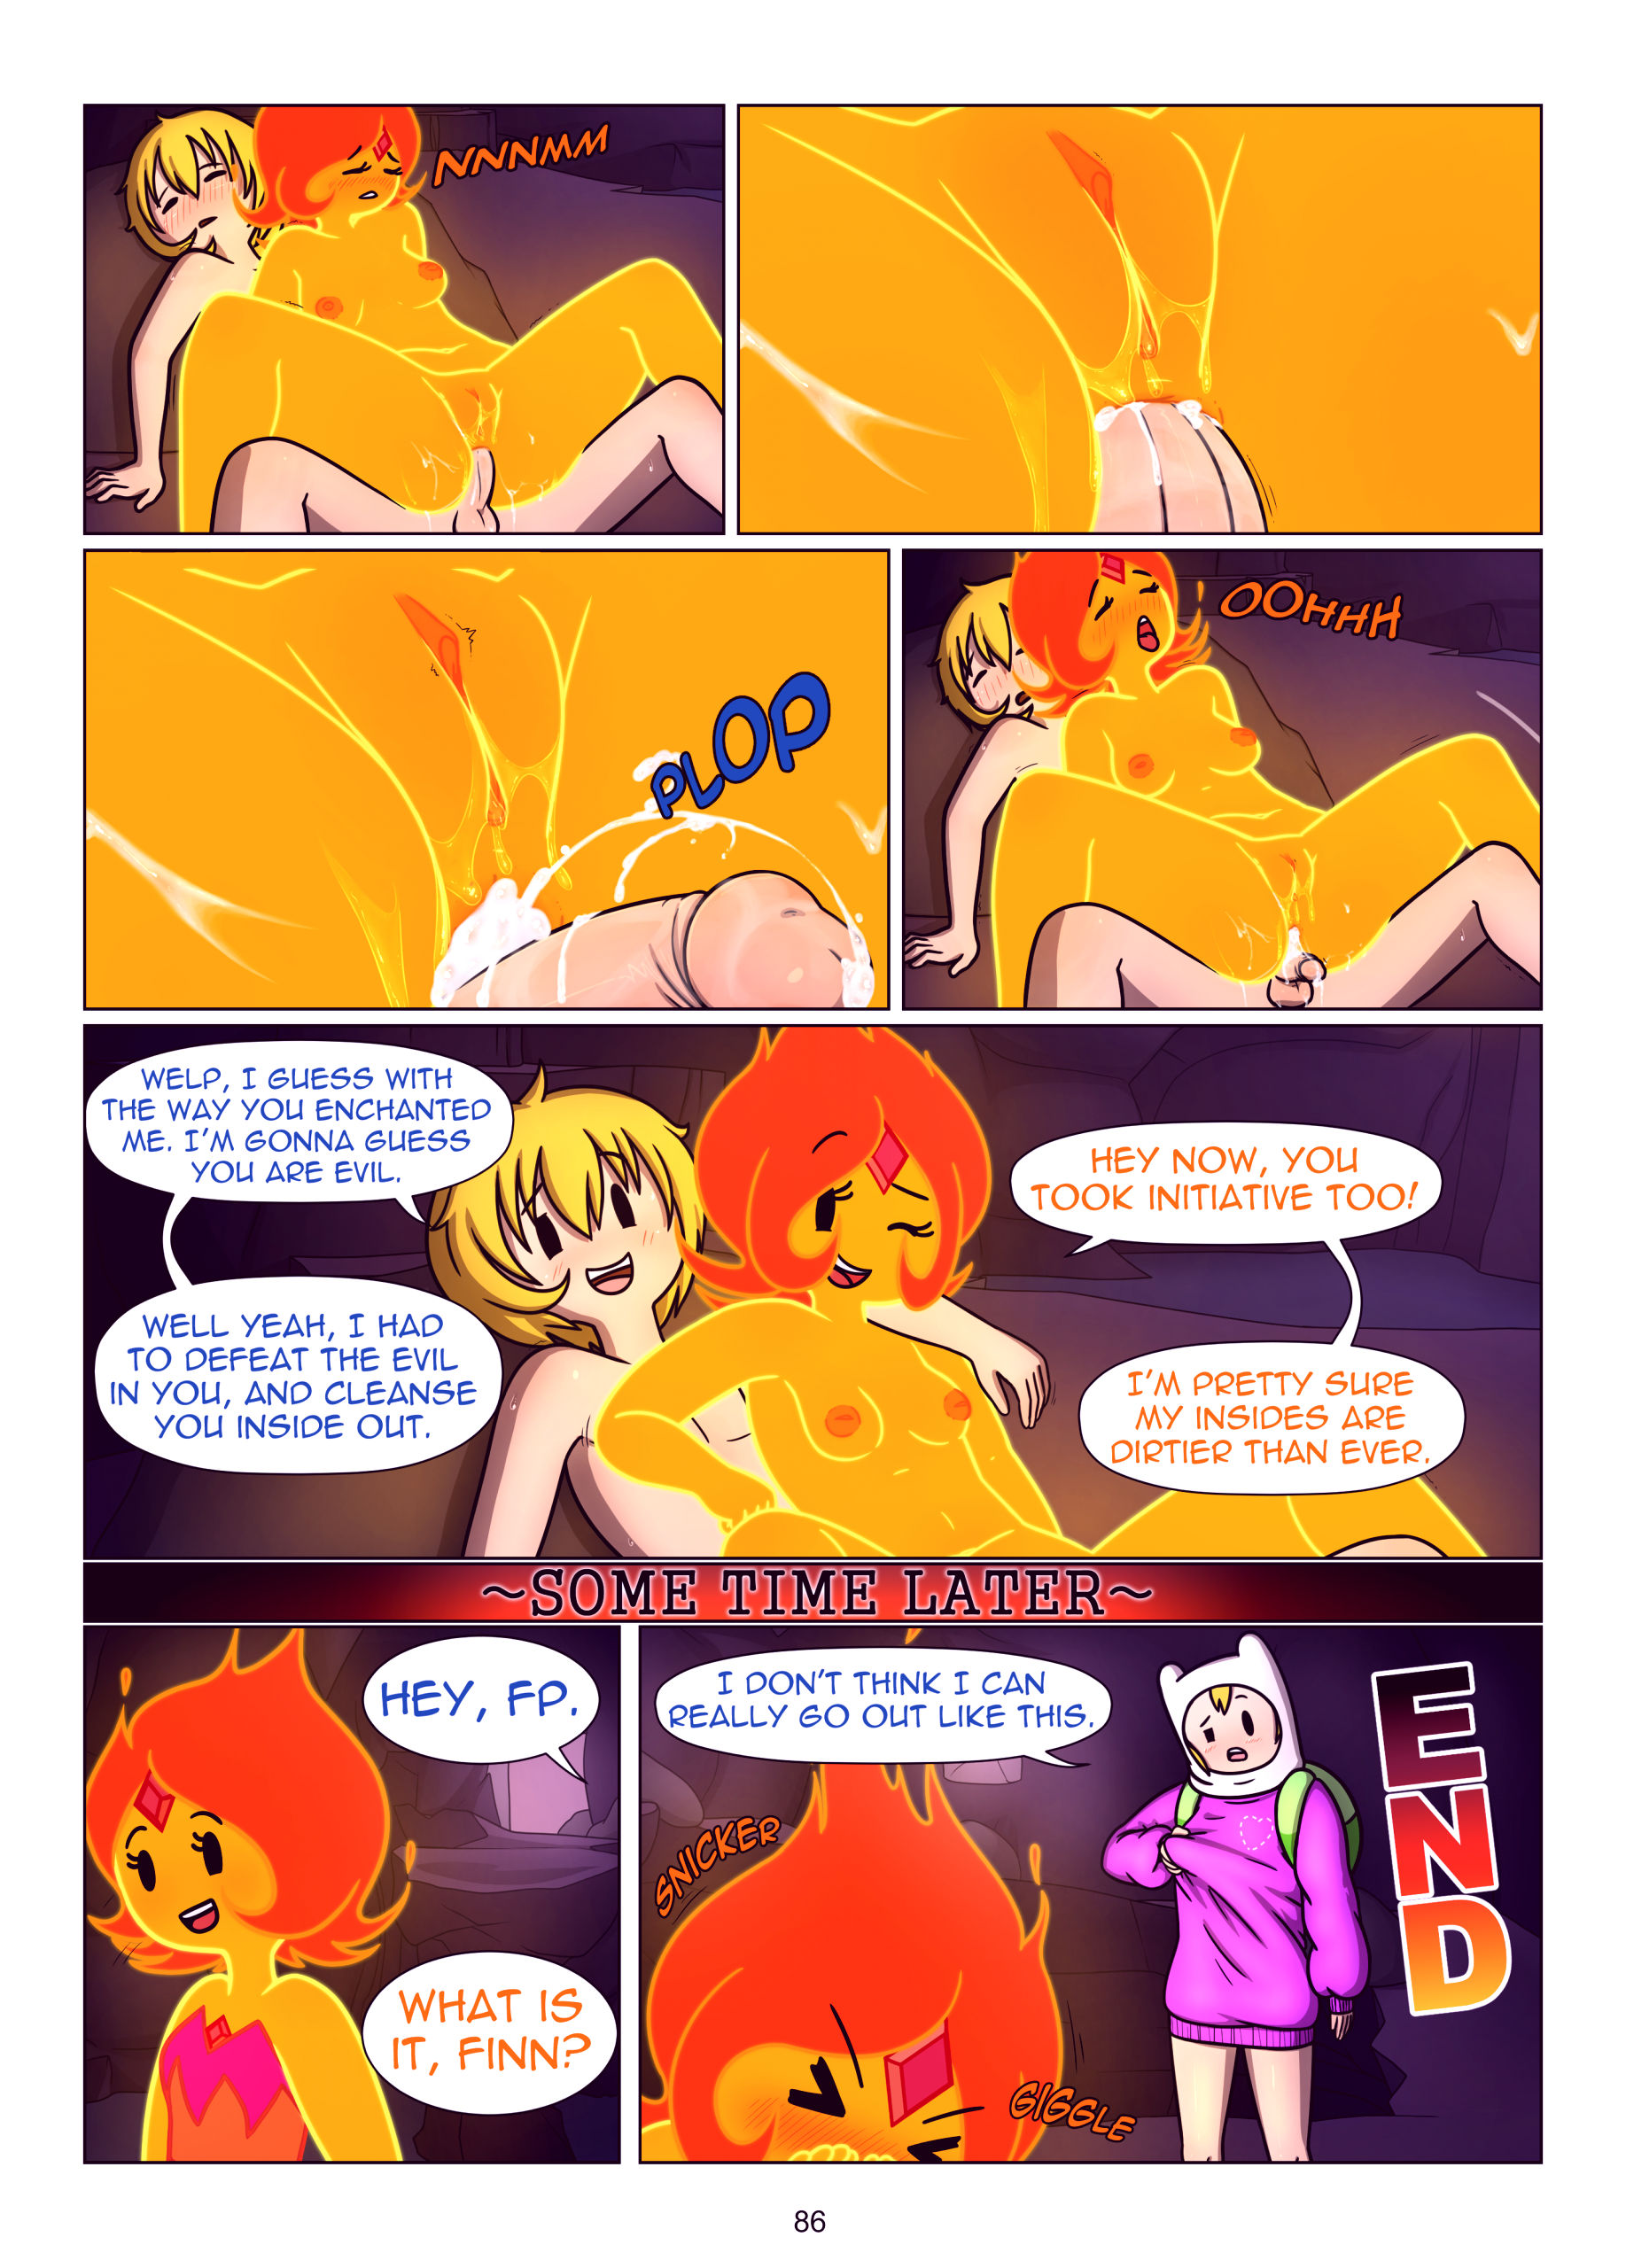 Misadventure time the collection porn comic picture 87